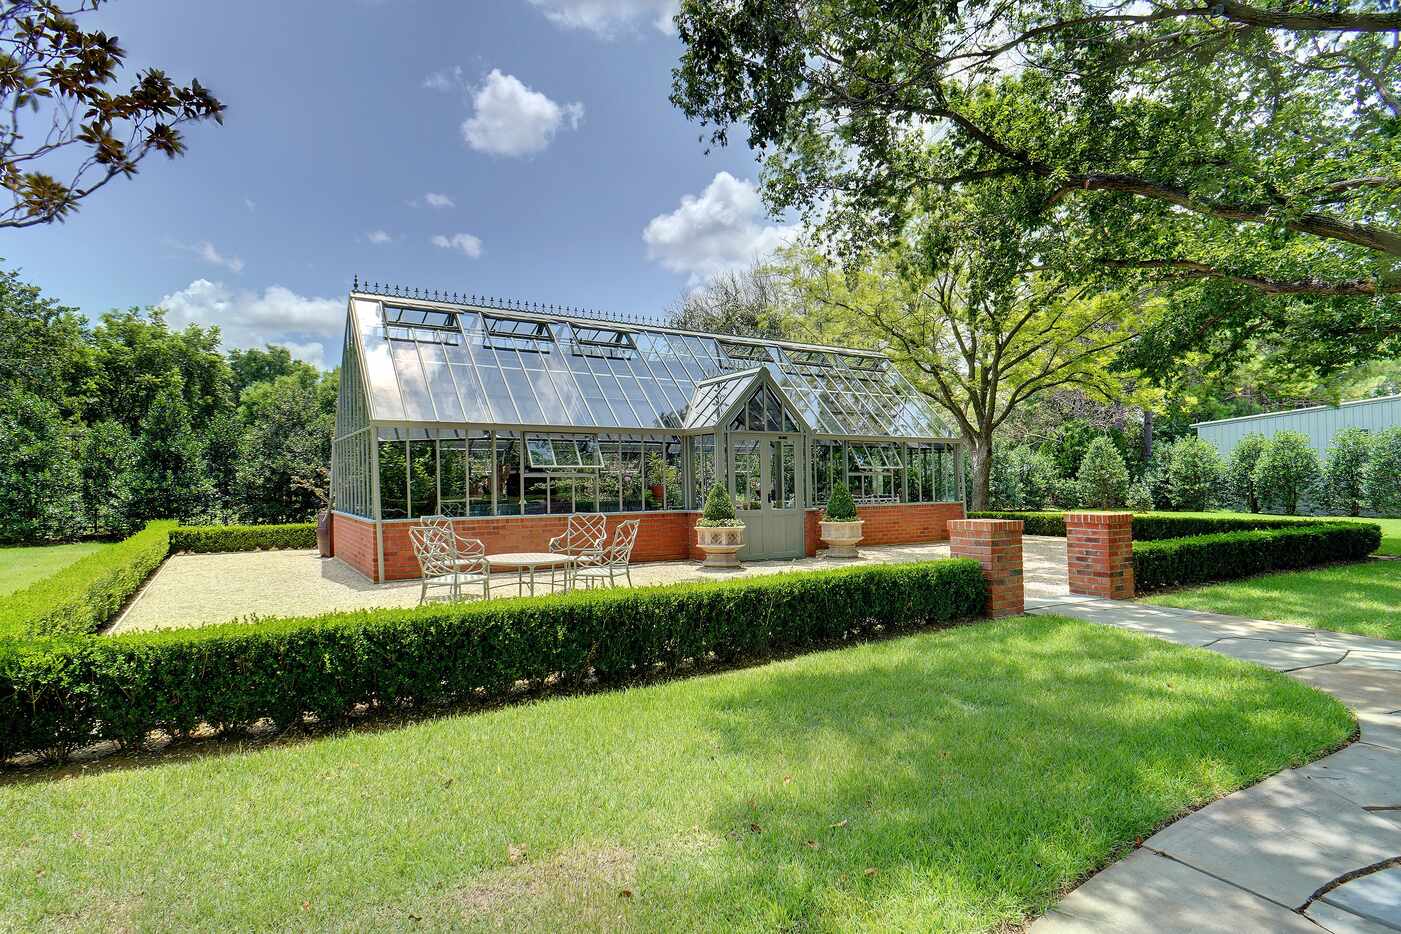 The classically-styled greenhouse on the property at 6401 Westcoat Drive in Colleyville has...